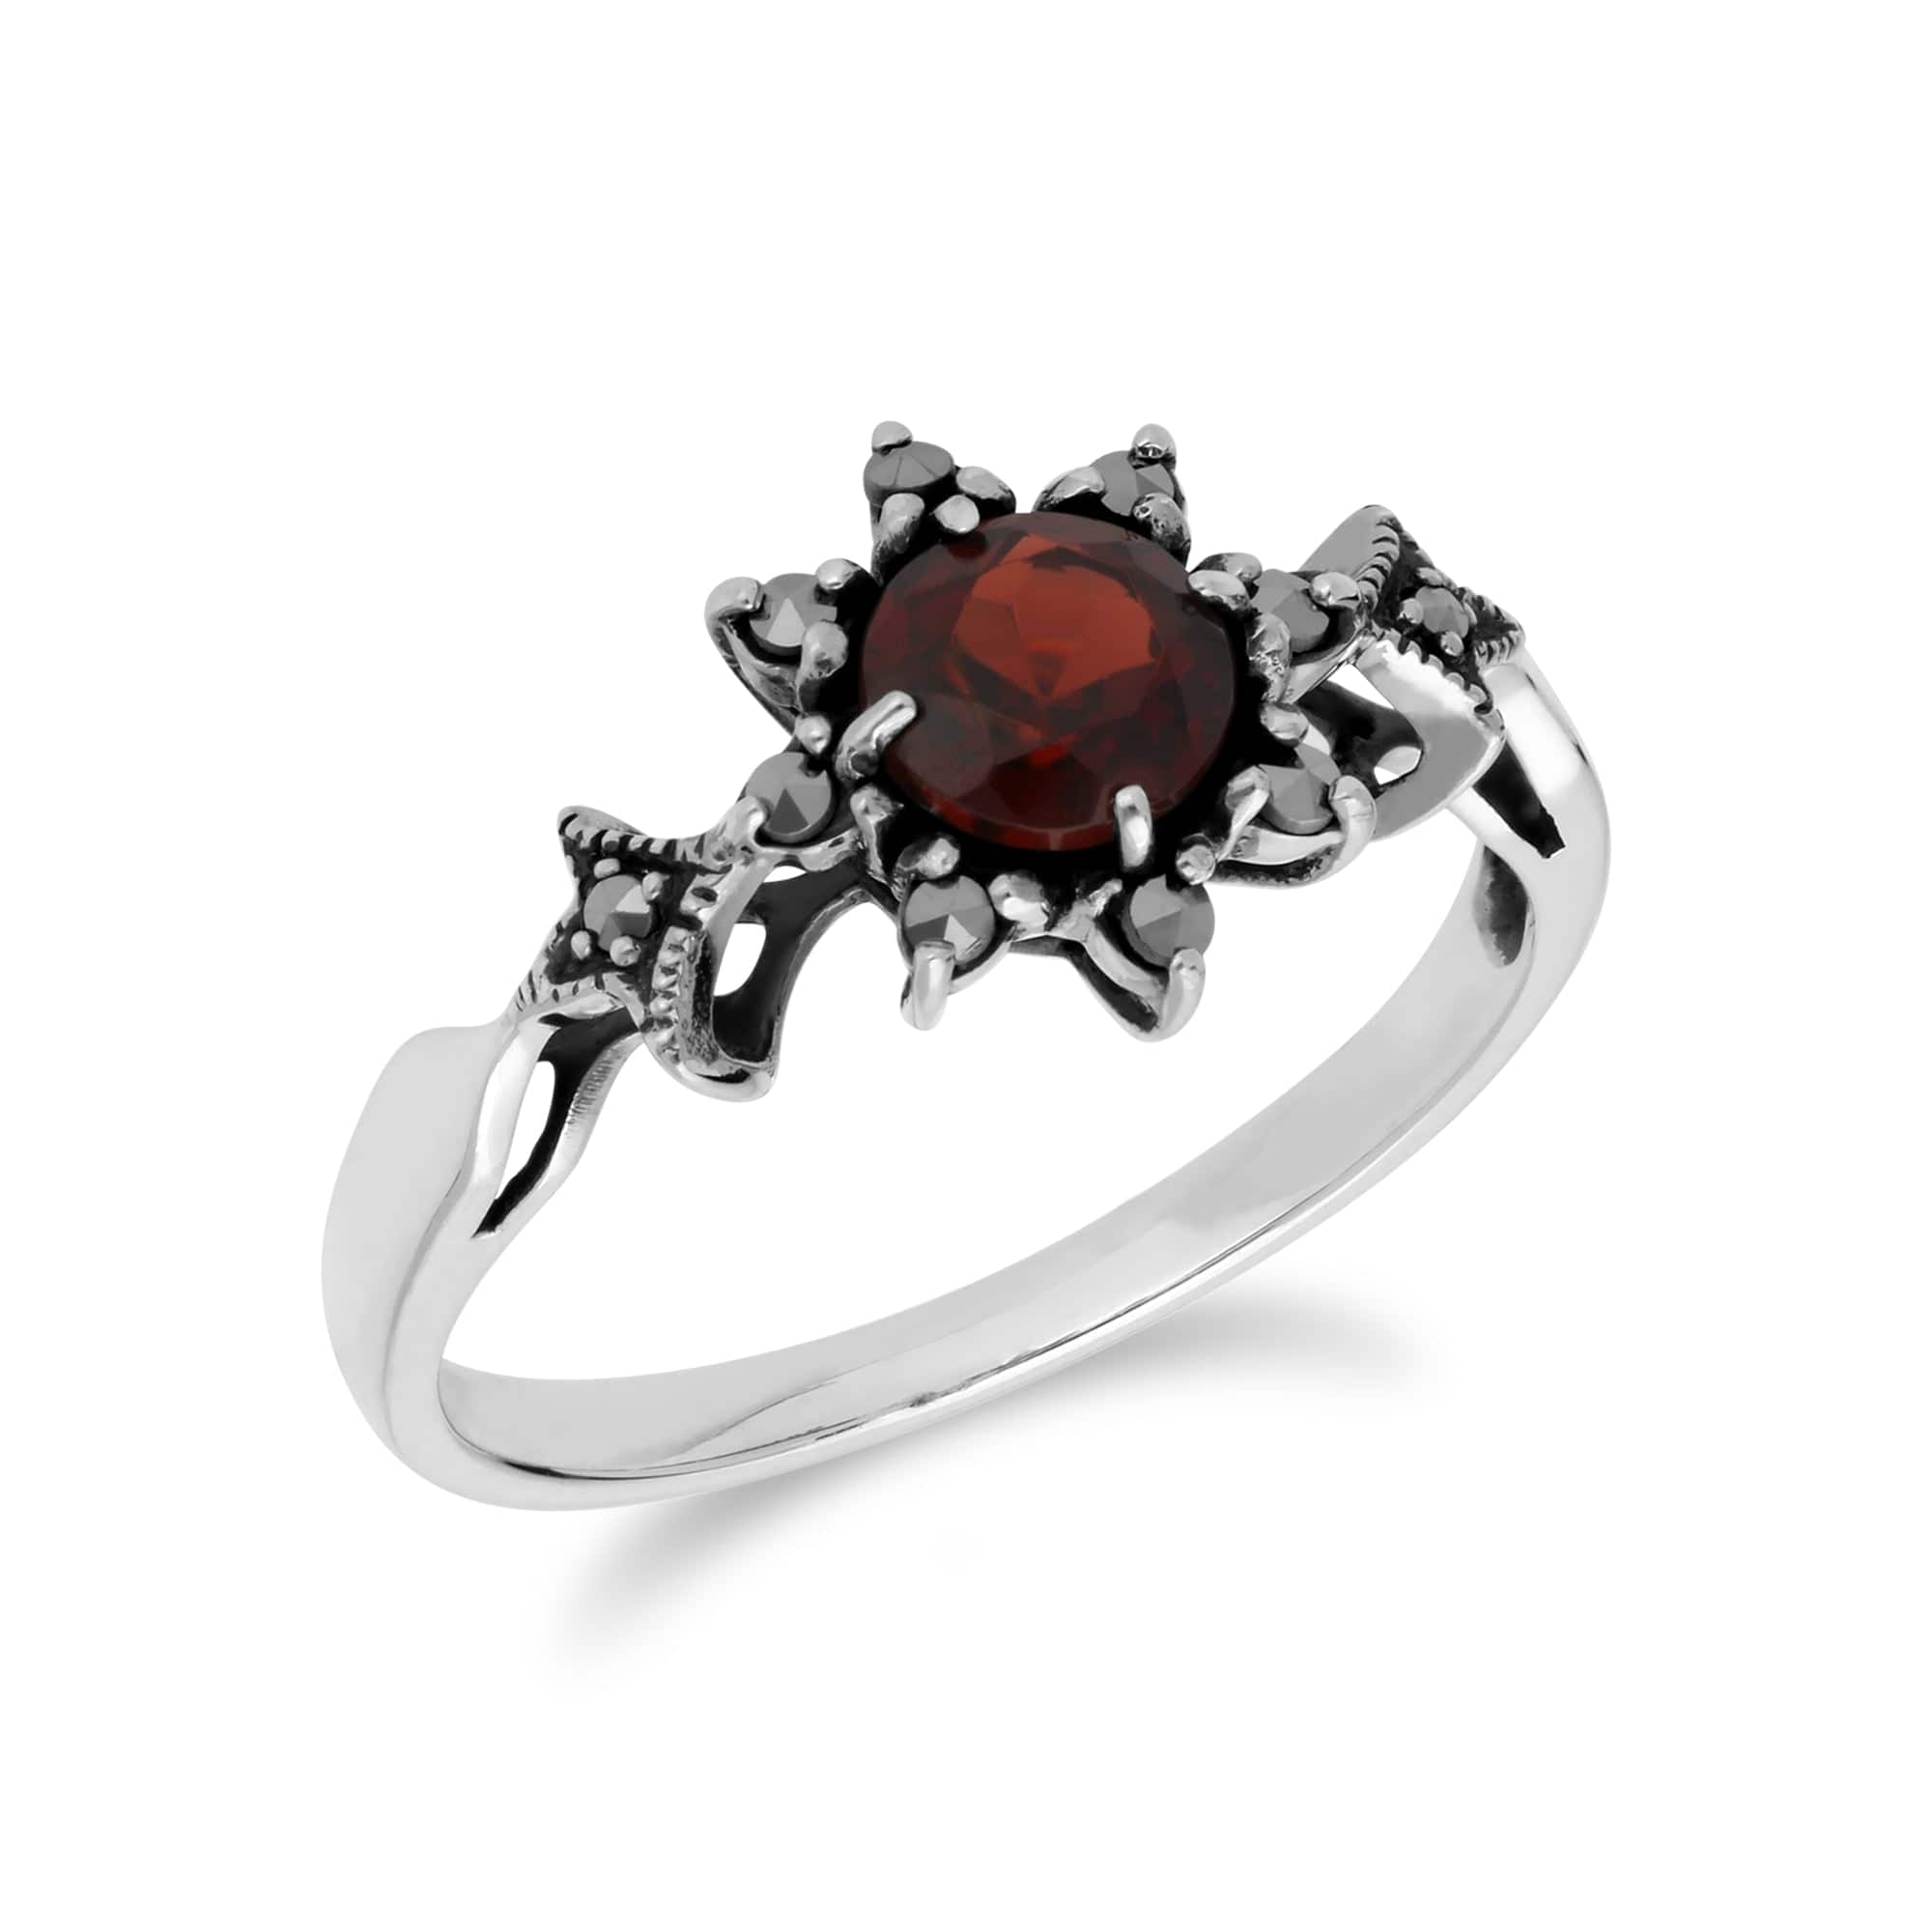 214R599503925 Art Deco Style Round Garnet & Marcasite Floral Ring in 925 Sterling Silver 2